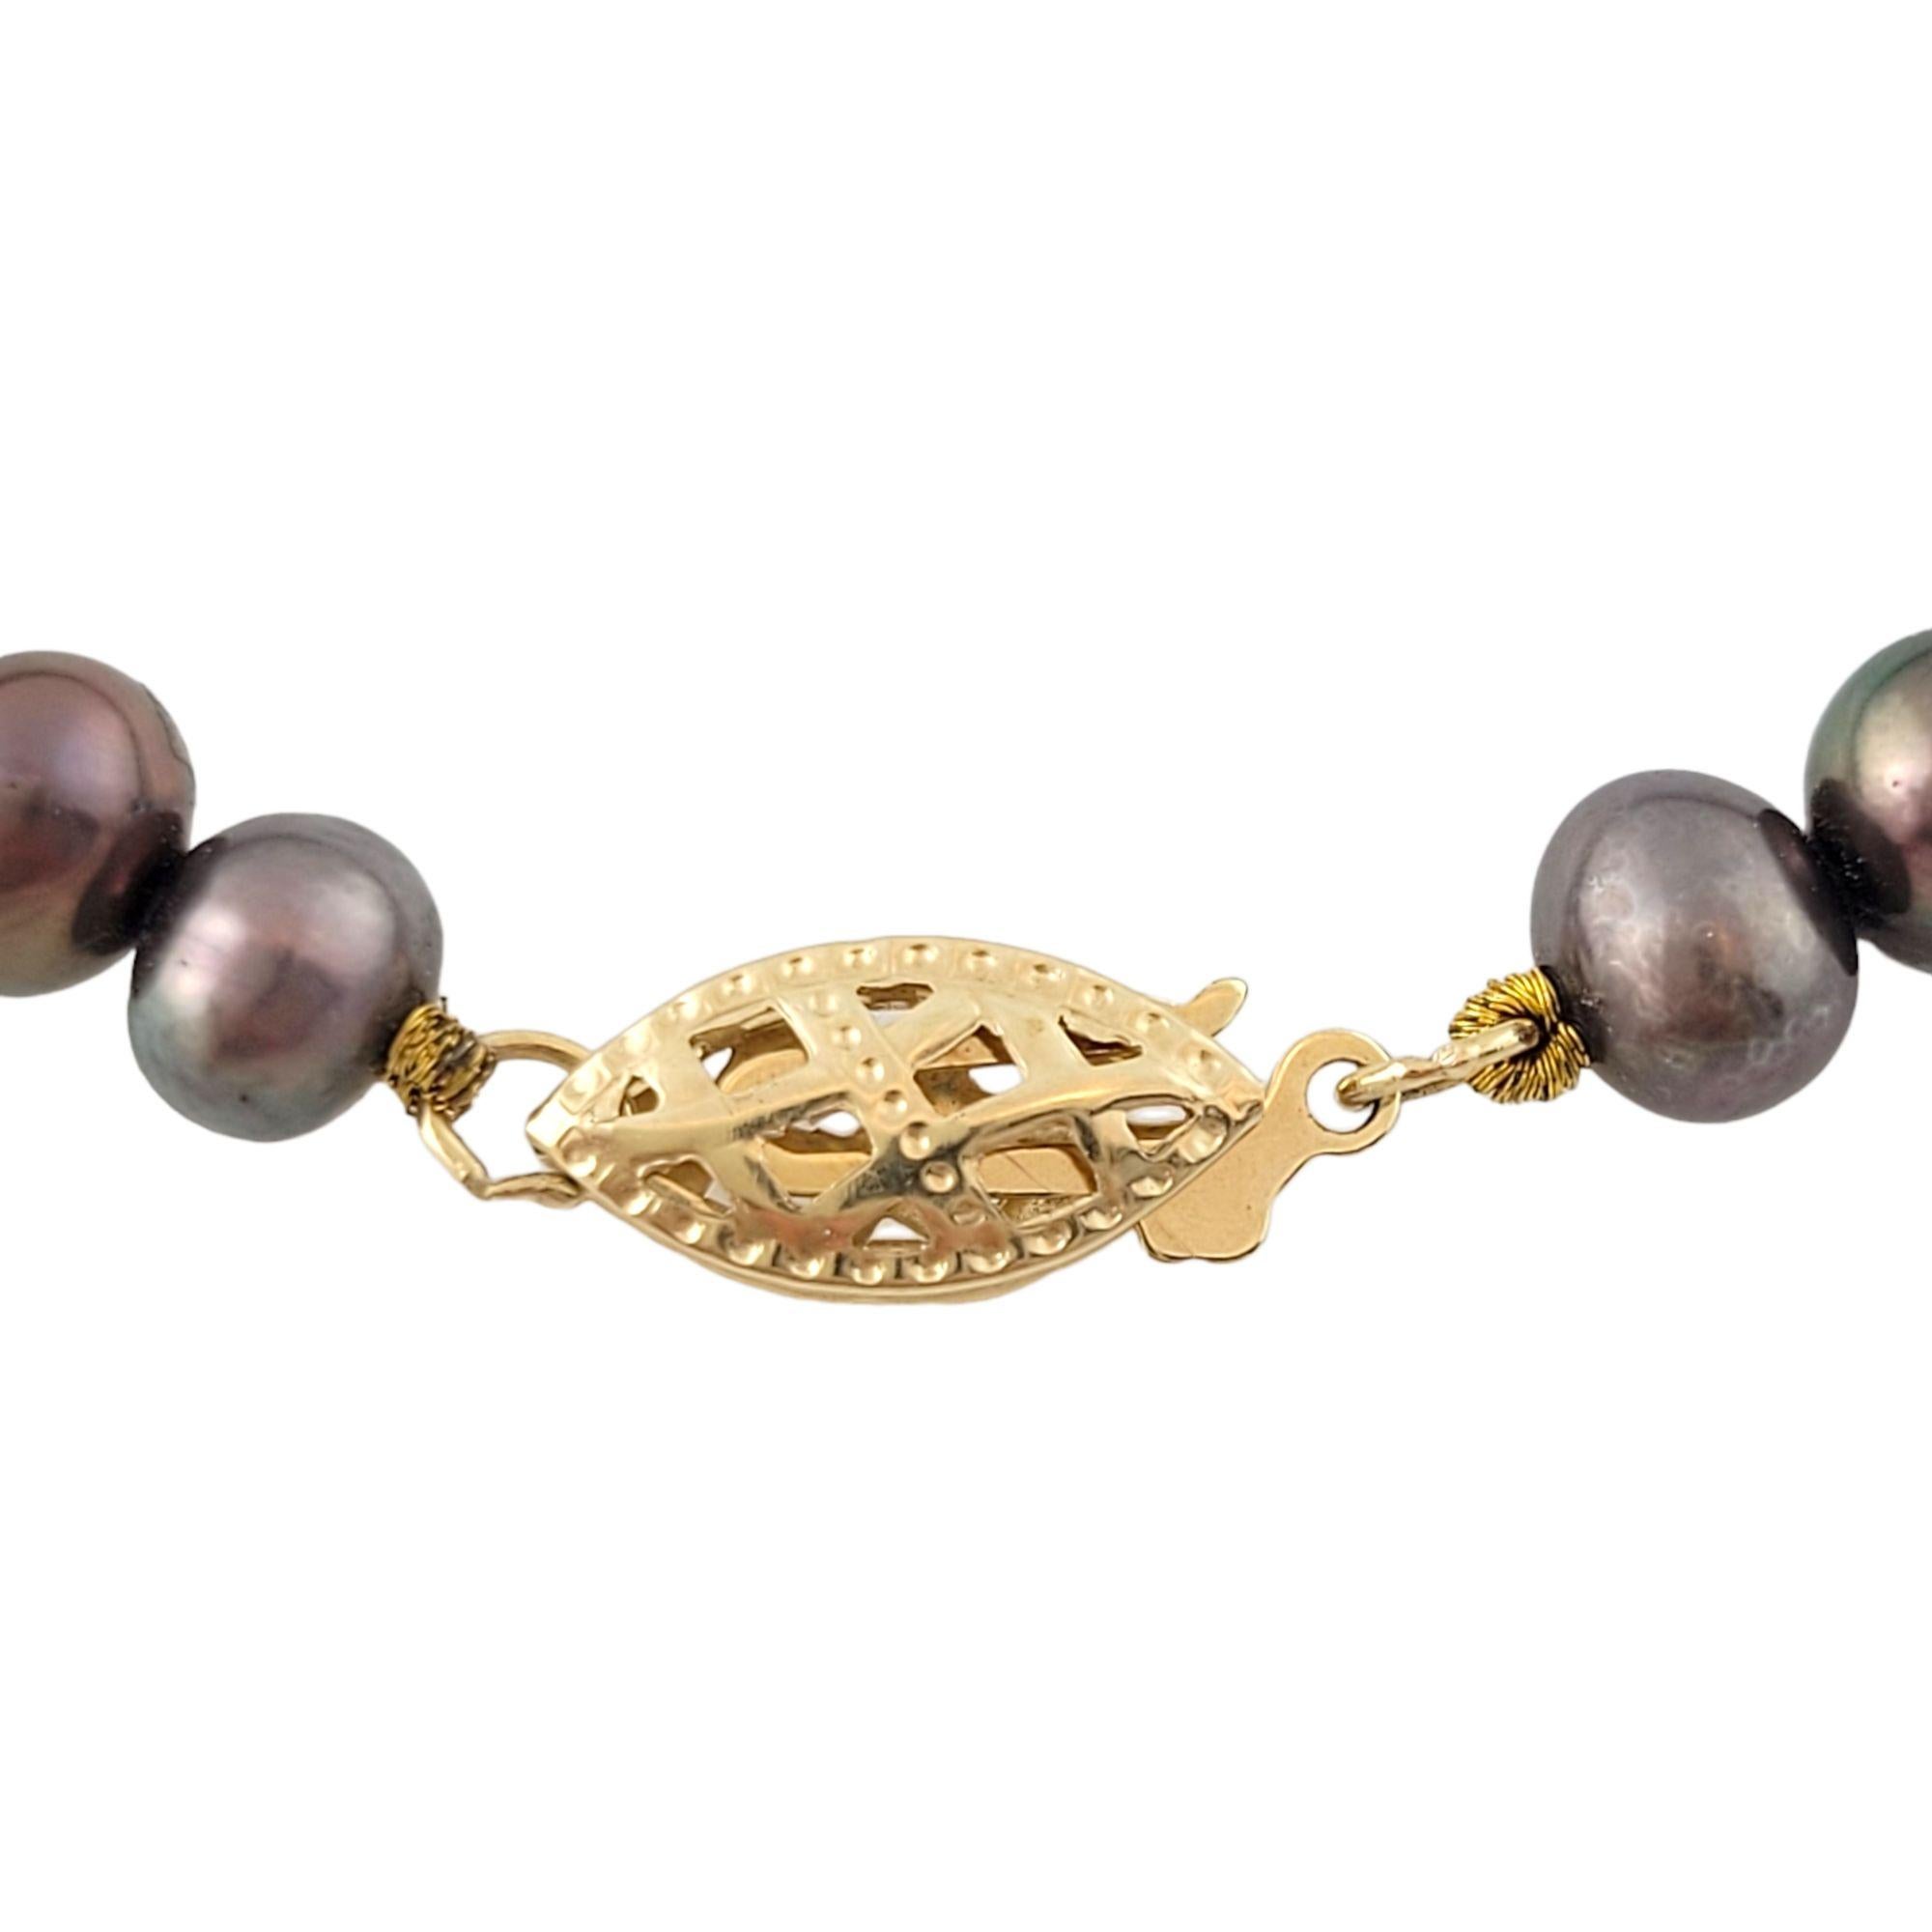 Gorgeous freshwater pearl bracelet with 14K yellow gold clasp!

(38 pearls)

Pearl size: approximately 5.5mm each

Bracelet fits up to 7.25